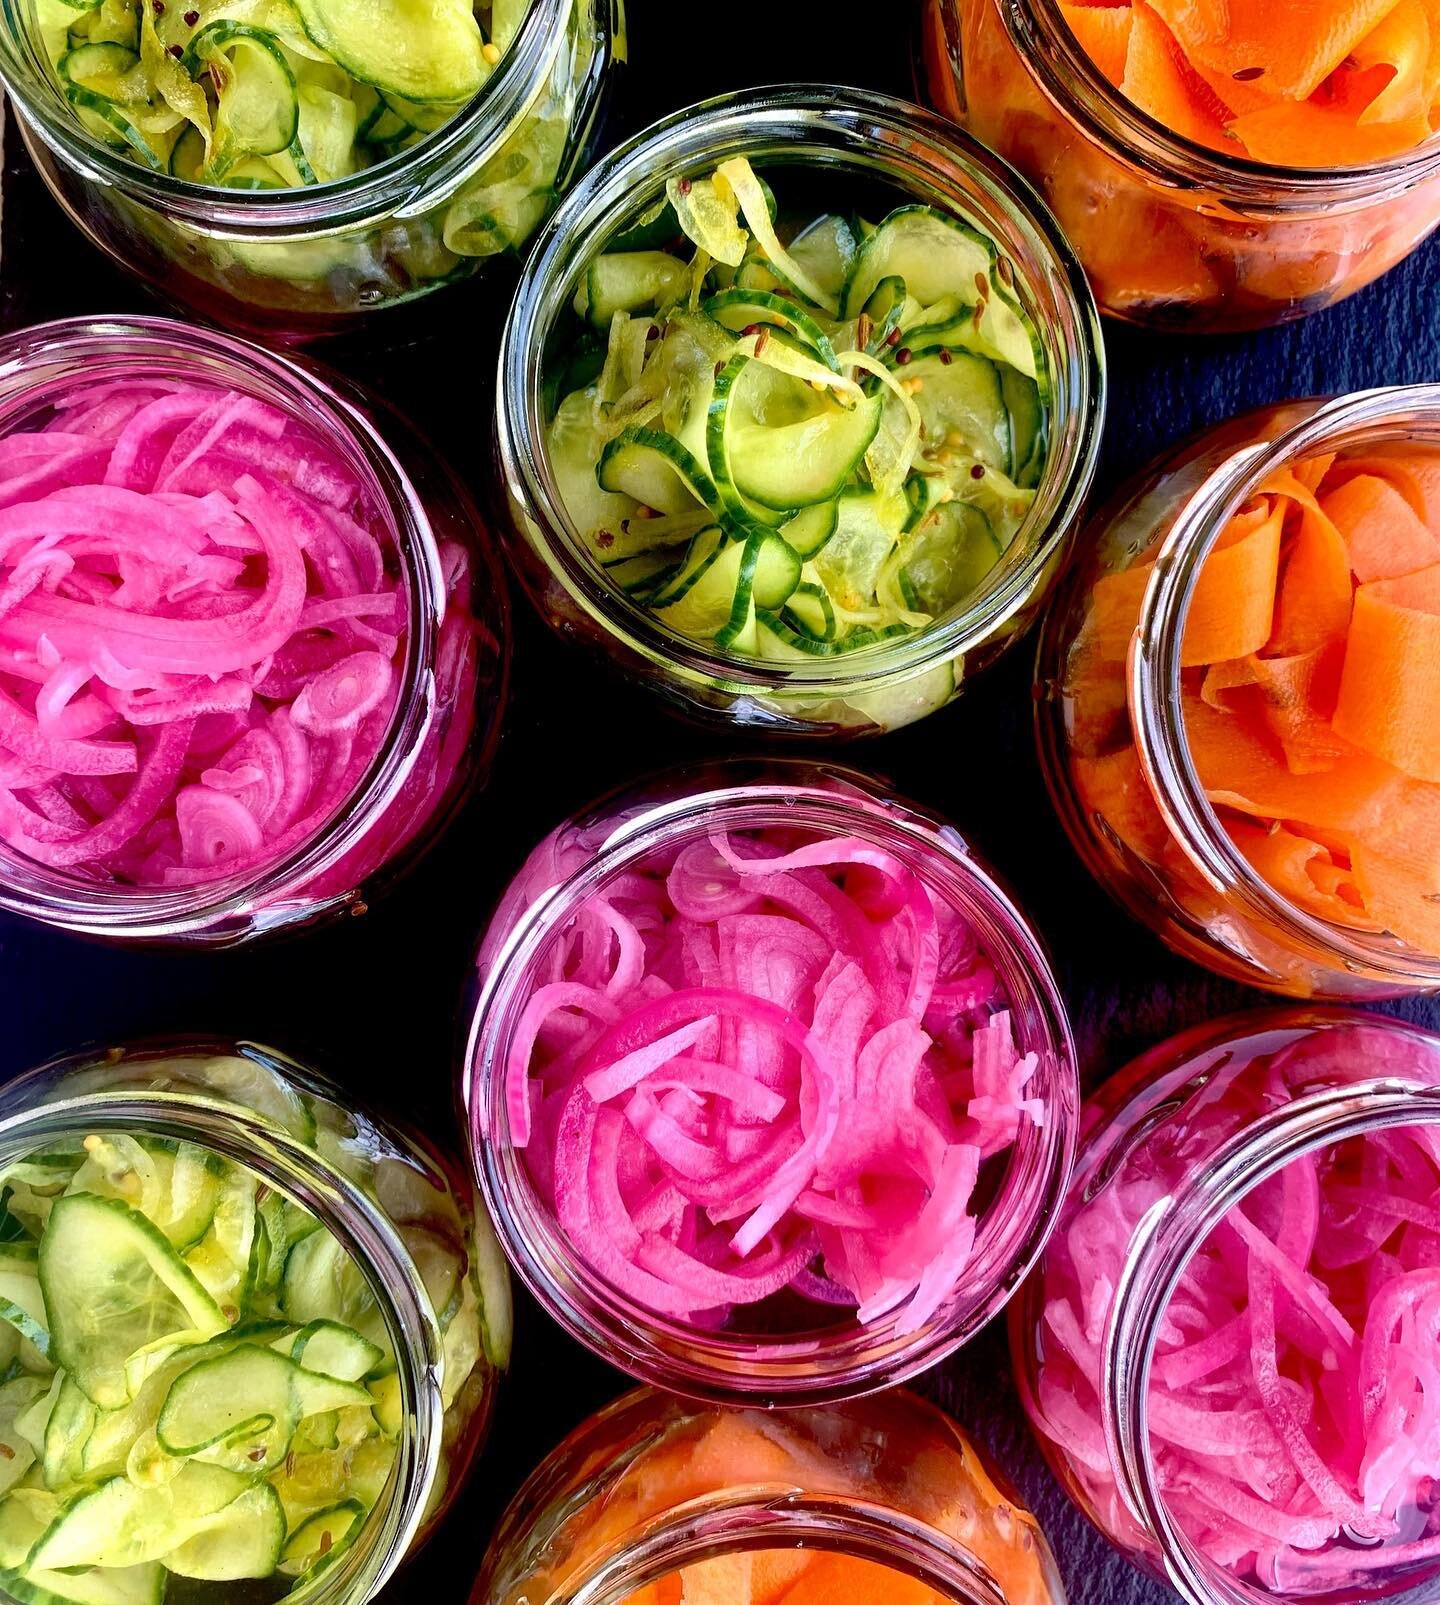 𝚃𝚑𝚎 𝙿𝚒𝚌𝚔𝚕𝚎 𝙱𝚊𝚛 🧅🥕🥒
Nearly vodka pickled fennel season again&hellip;
Our house speciality pickles feature on every graze table, banquet and in our grazing boxes. Seasonal, fresh &amp; different weekly 🙌🏻
.
#thepicklebar #pickles #graz